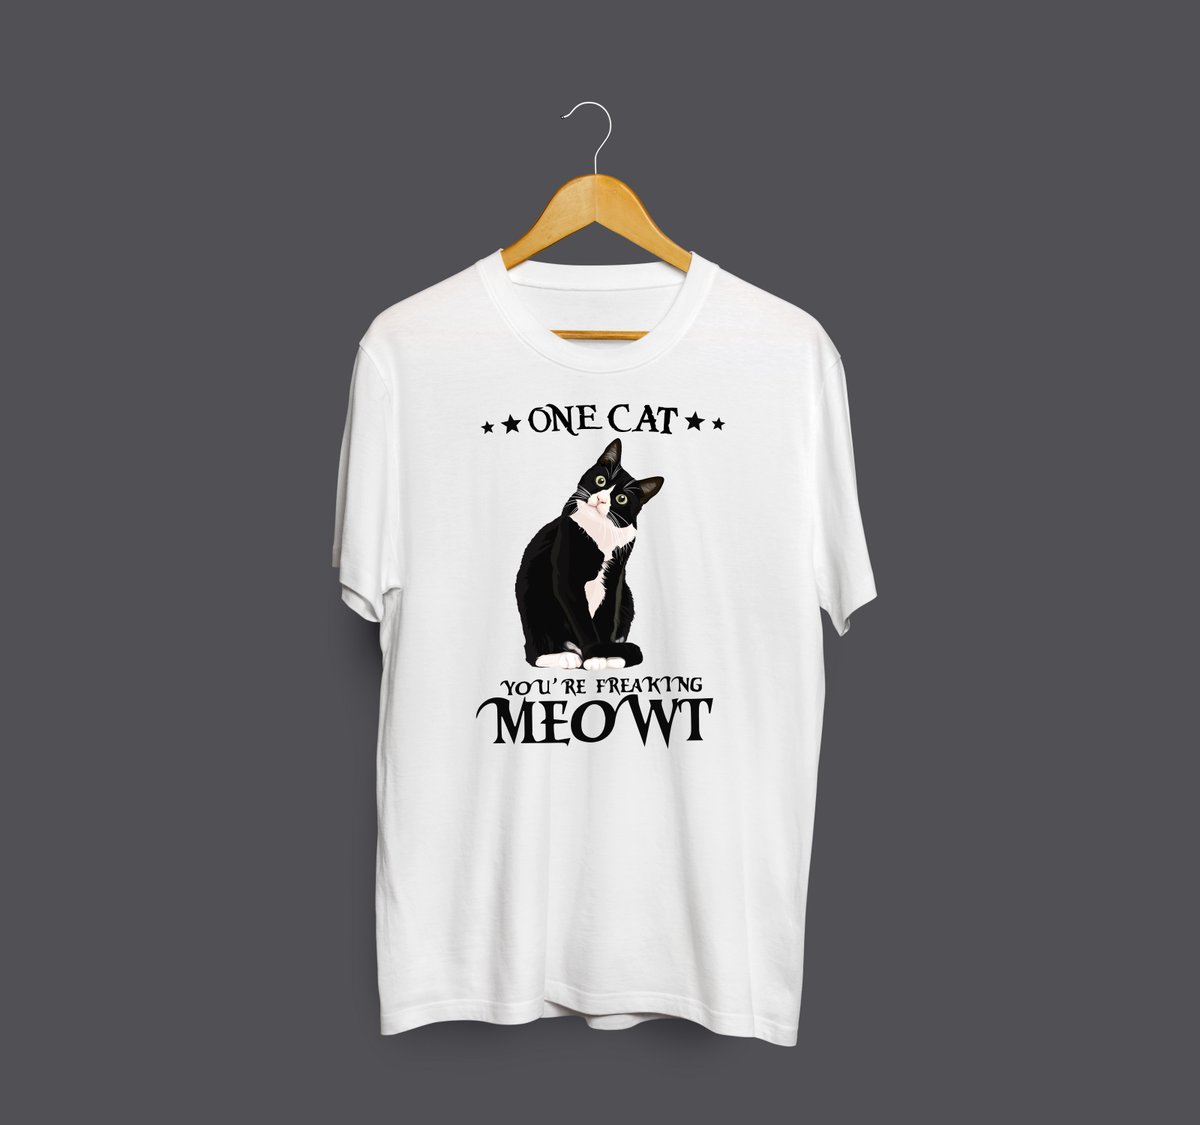 You're Freaking #MEOWT Shirt Available Now.
Choose your best color and size form our store: teekook.com

#MEOWTShirt #catshirt #cat #catlovers #catlover #catloversclub #YoureFreakingMEOWT